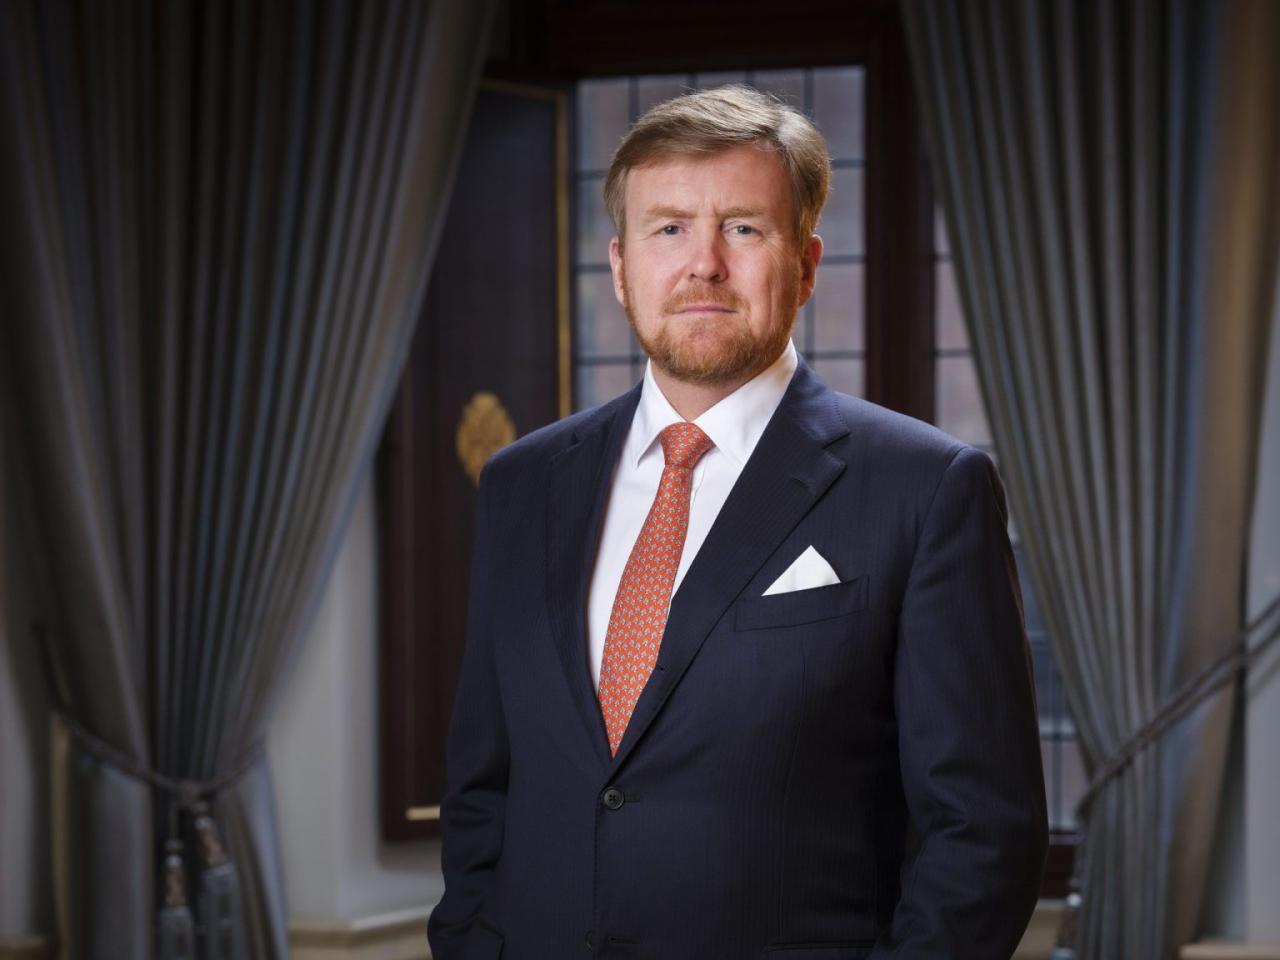 Willem Alexander, A Monarch’s Reign, Passions, and Diplomacy